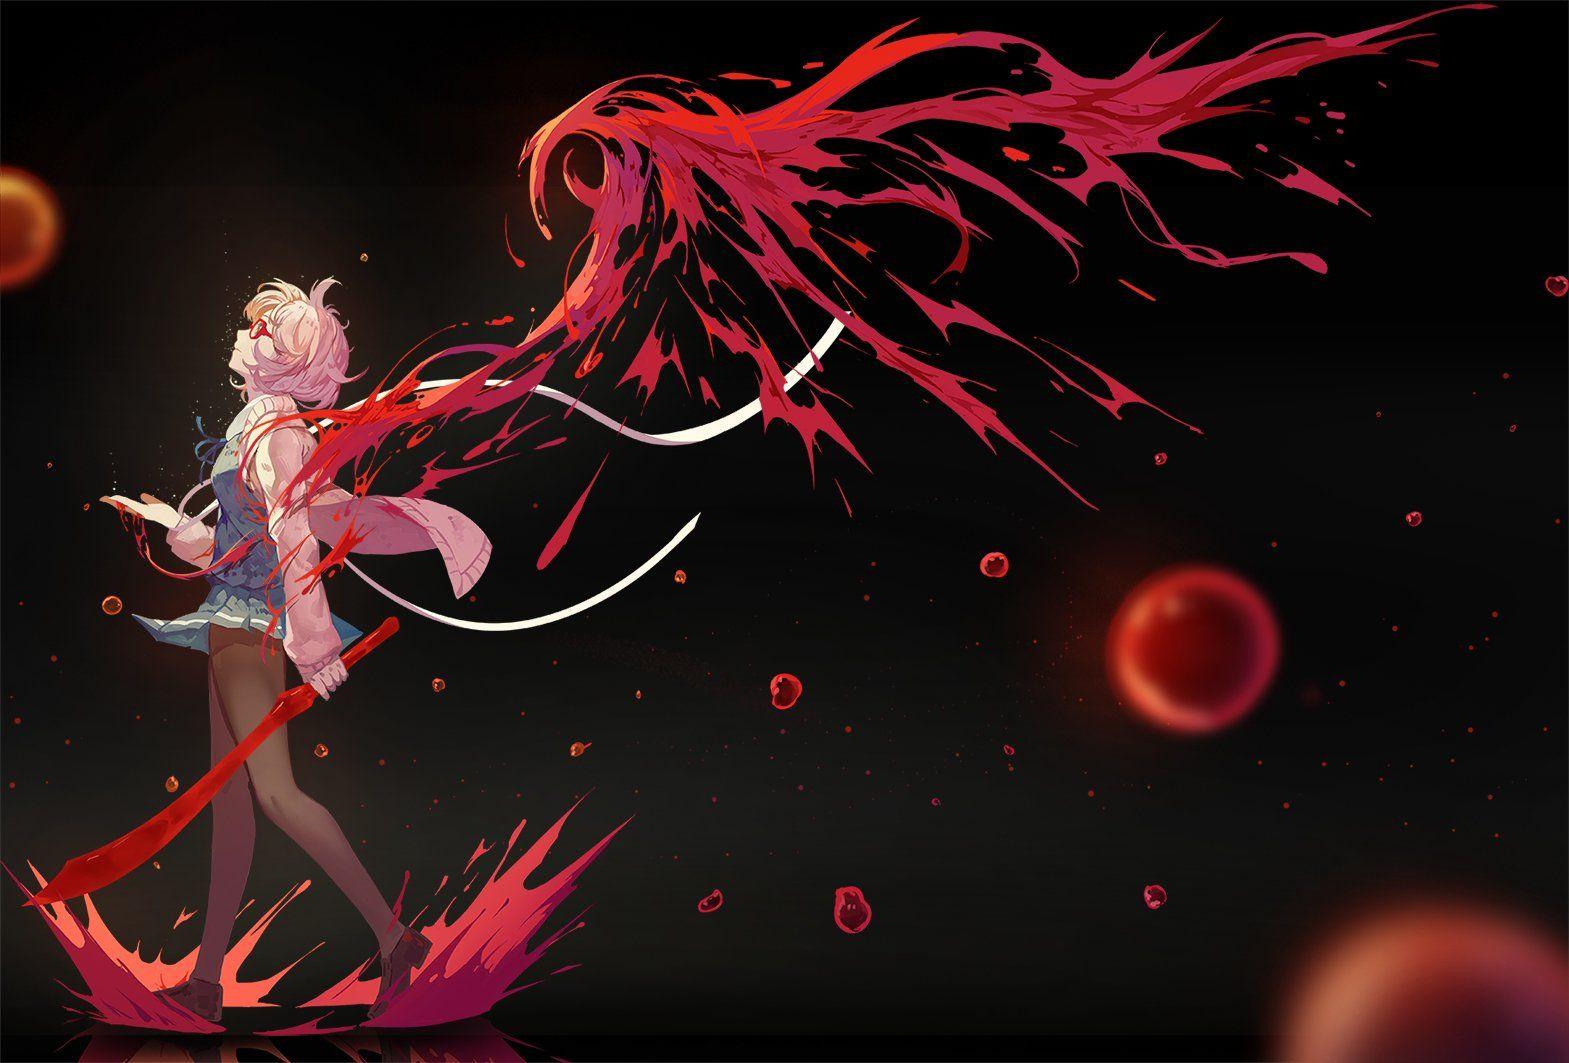 Beyond The Boundary Wallpapers Top Free Beyond The Boundary Backgrounds Wallpaperaccess